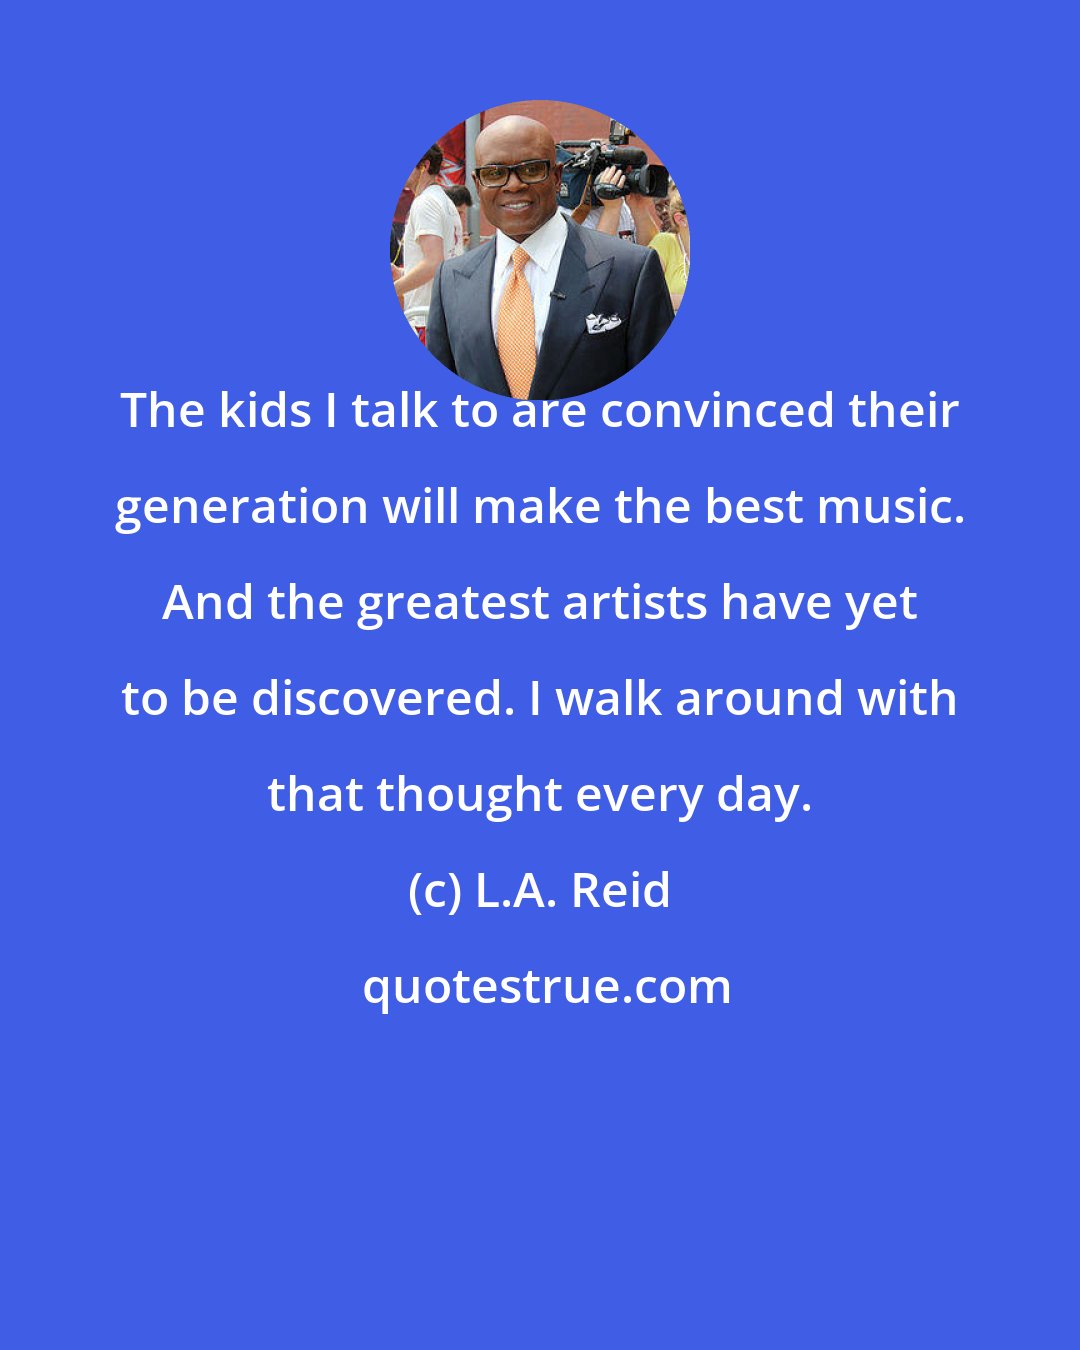 L.A. Reid: The kids I talk to are convinced their generation will make the best music. And the greatest artists have yet to be discovered. I walk around with that thought every day.